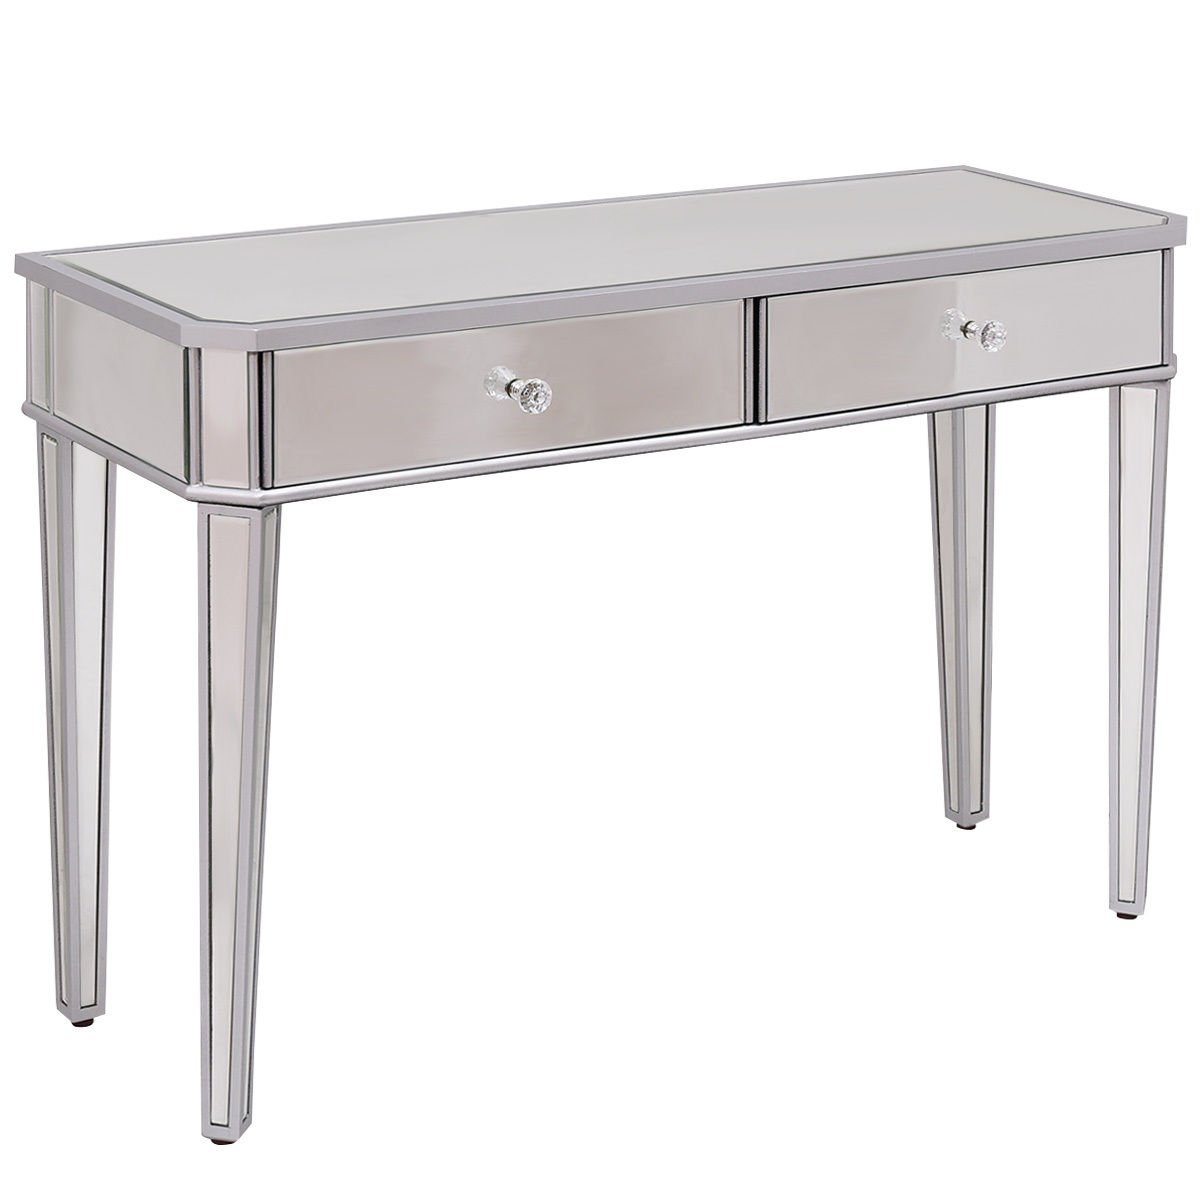 modern mirrored vanity make desk console dressing accent table drawers silver glass kitchen dining small white nightstand pedestal home goods tablecloths emerald coffee leather